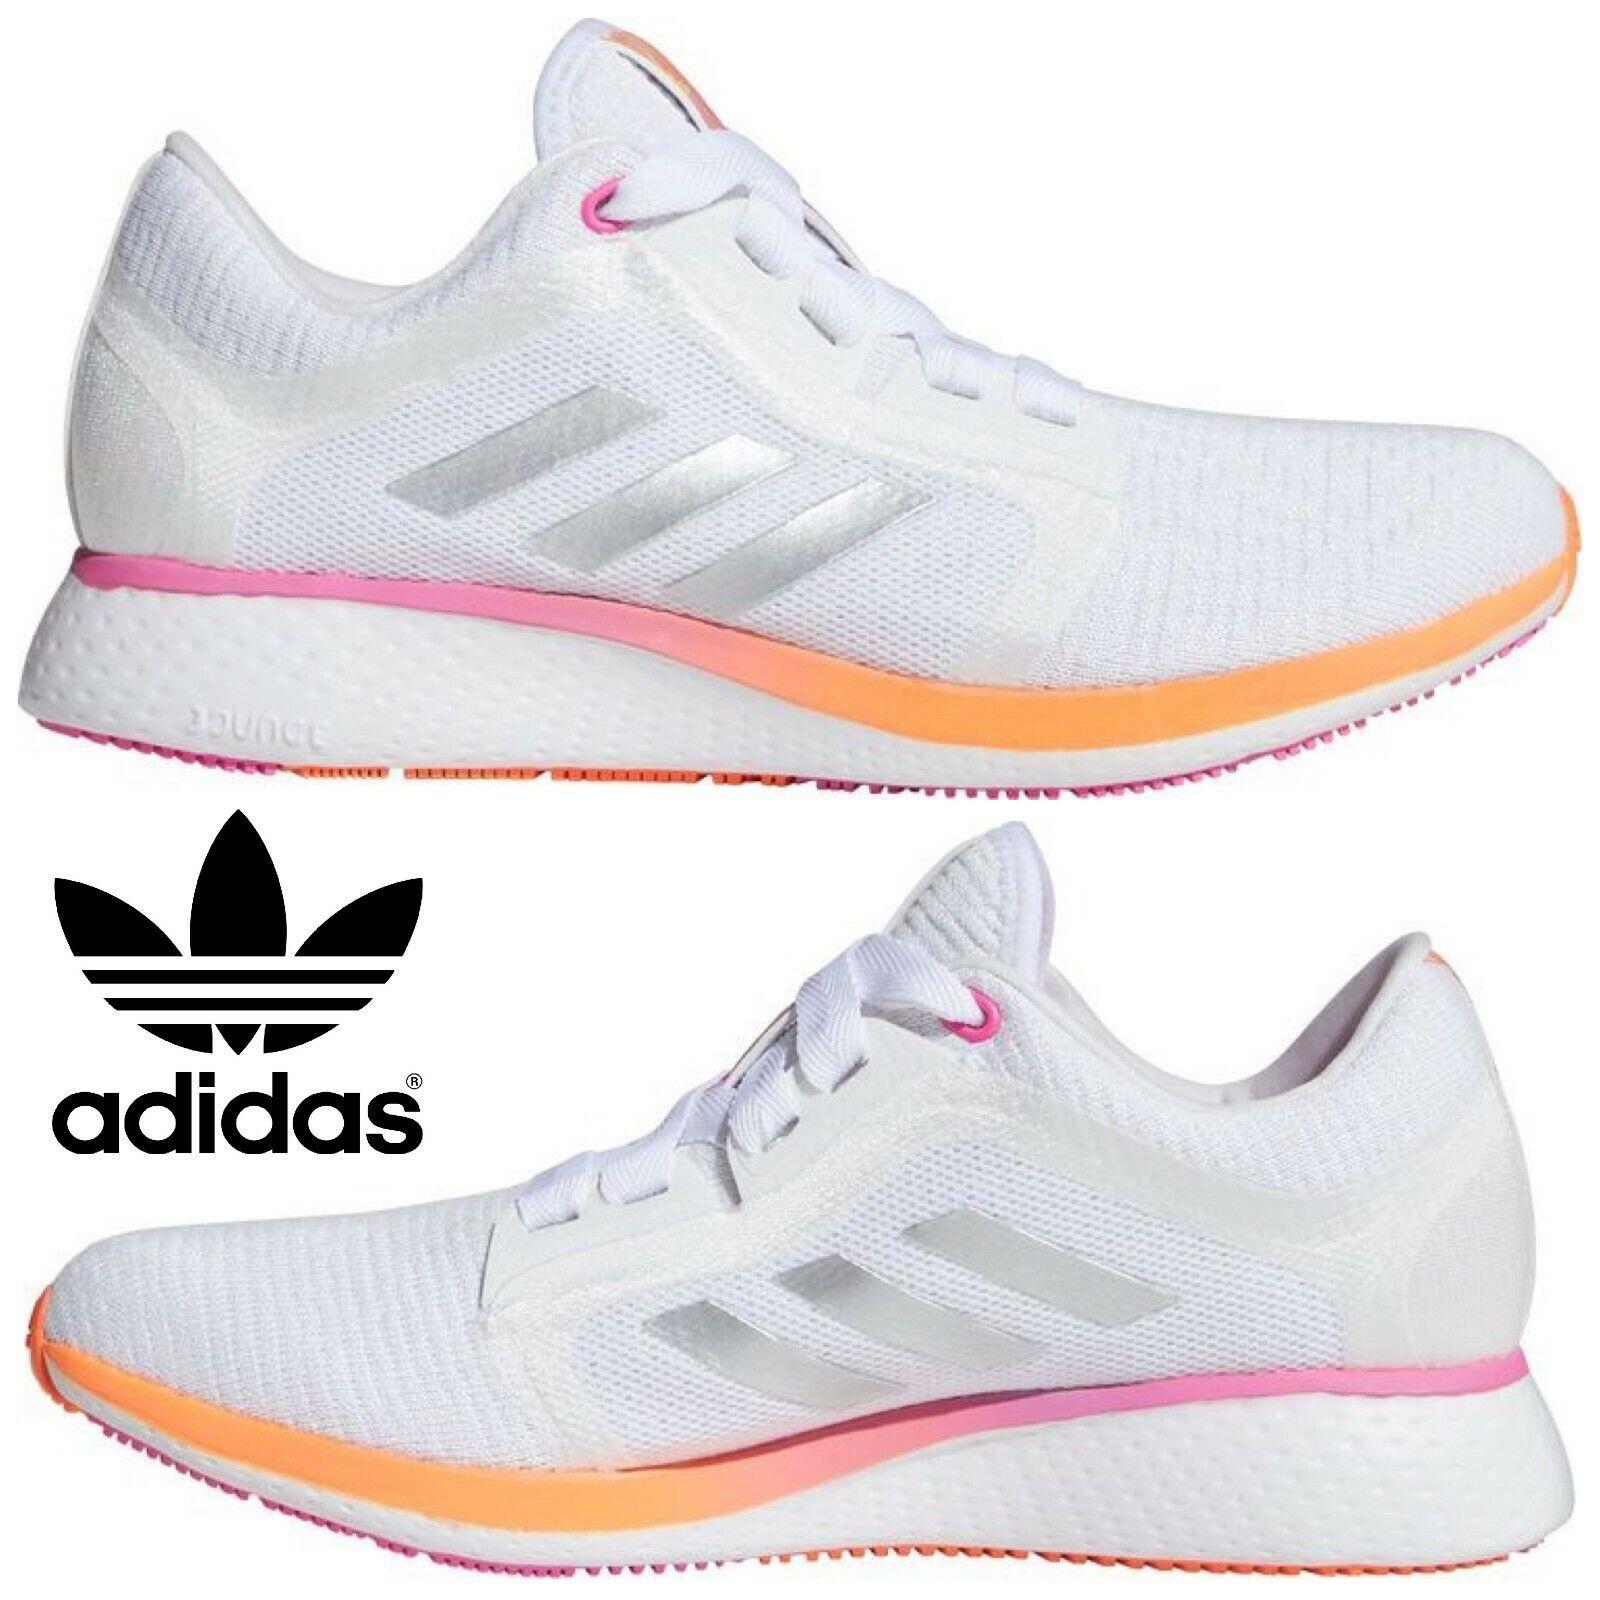 Adidas shoes Edge Lux - White , WHITE/PINK/YELLOW Manufacturer 9